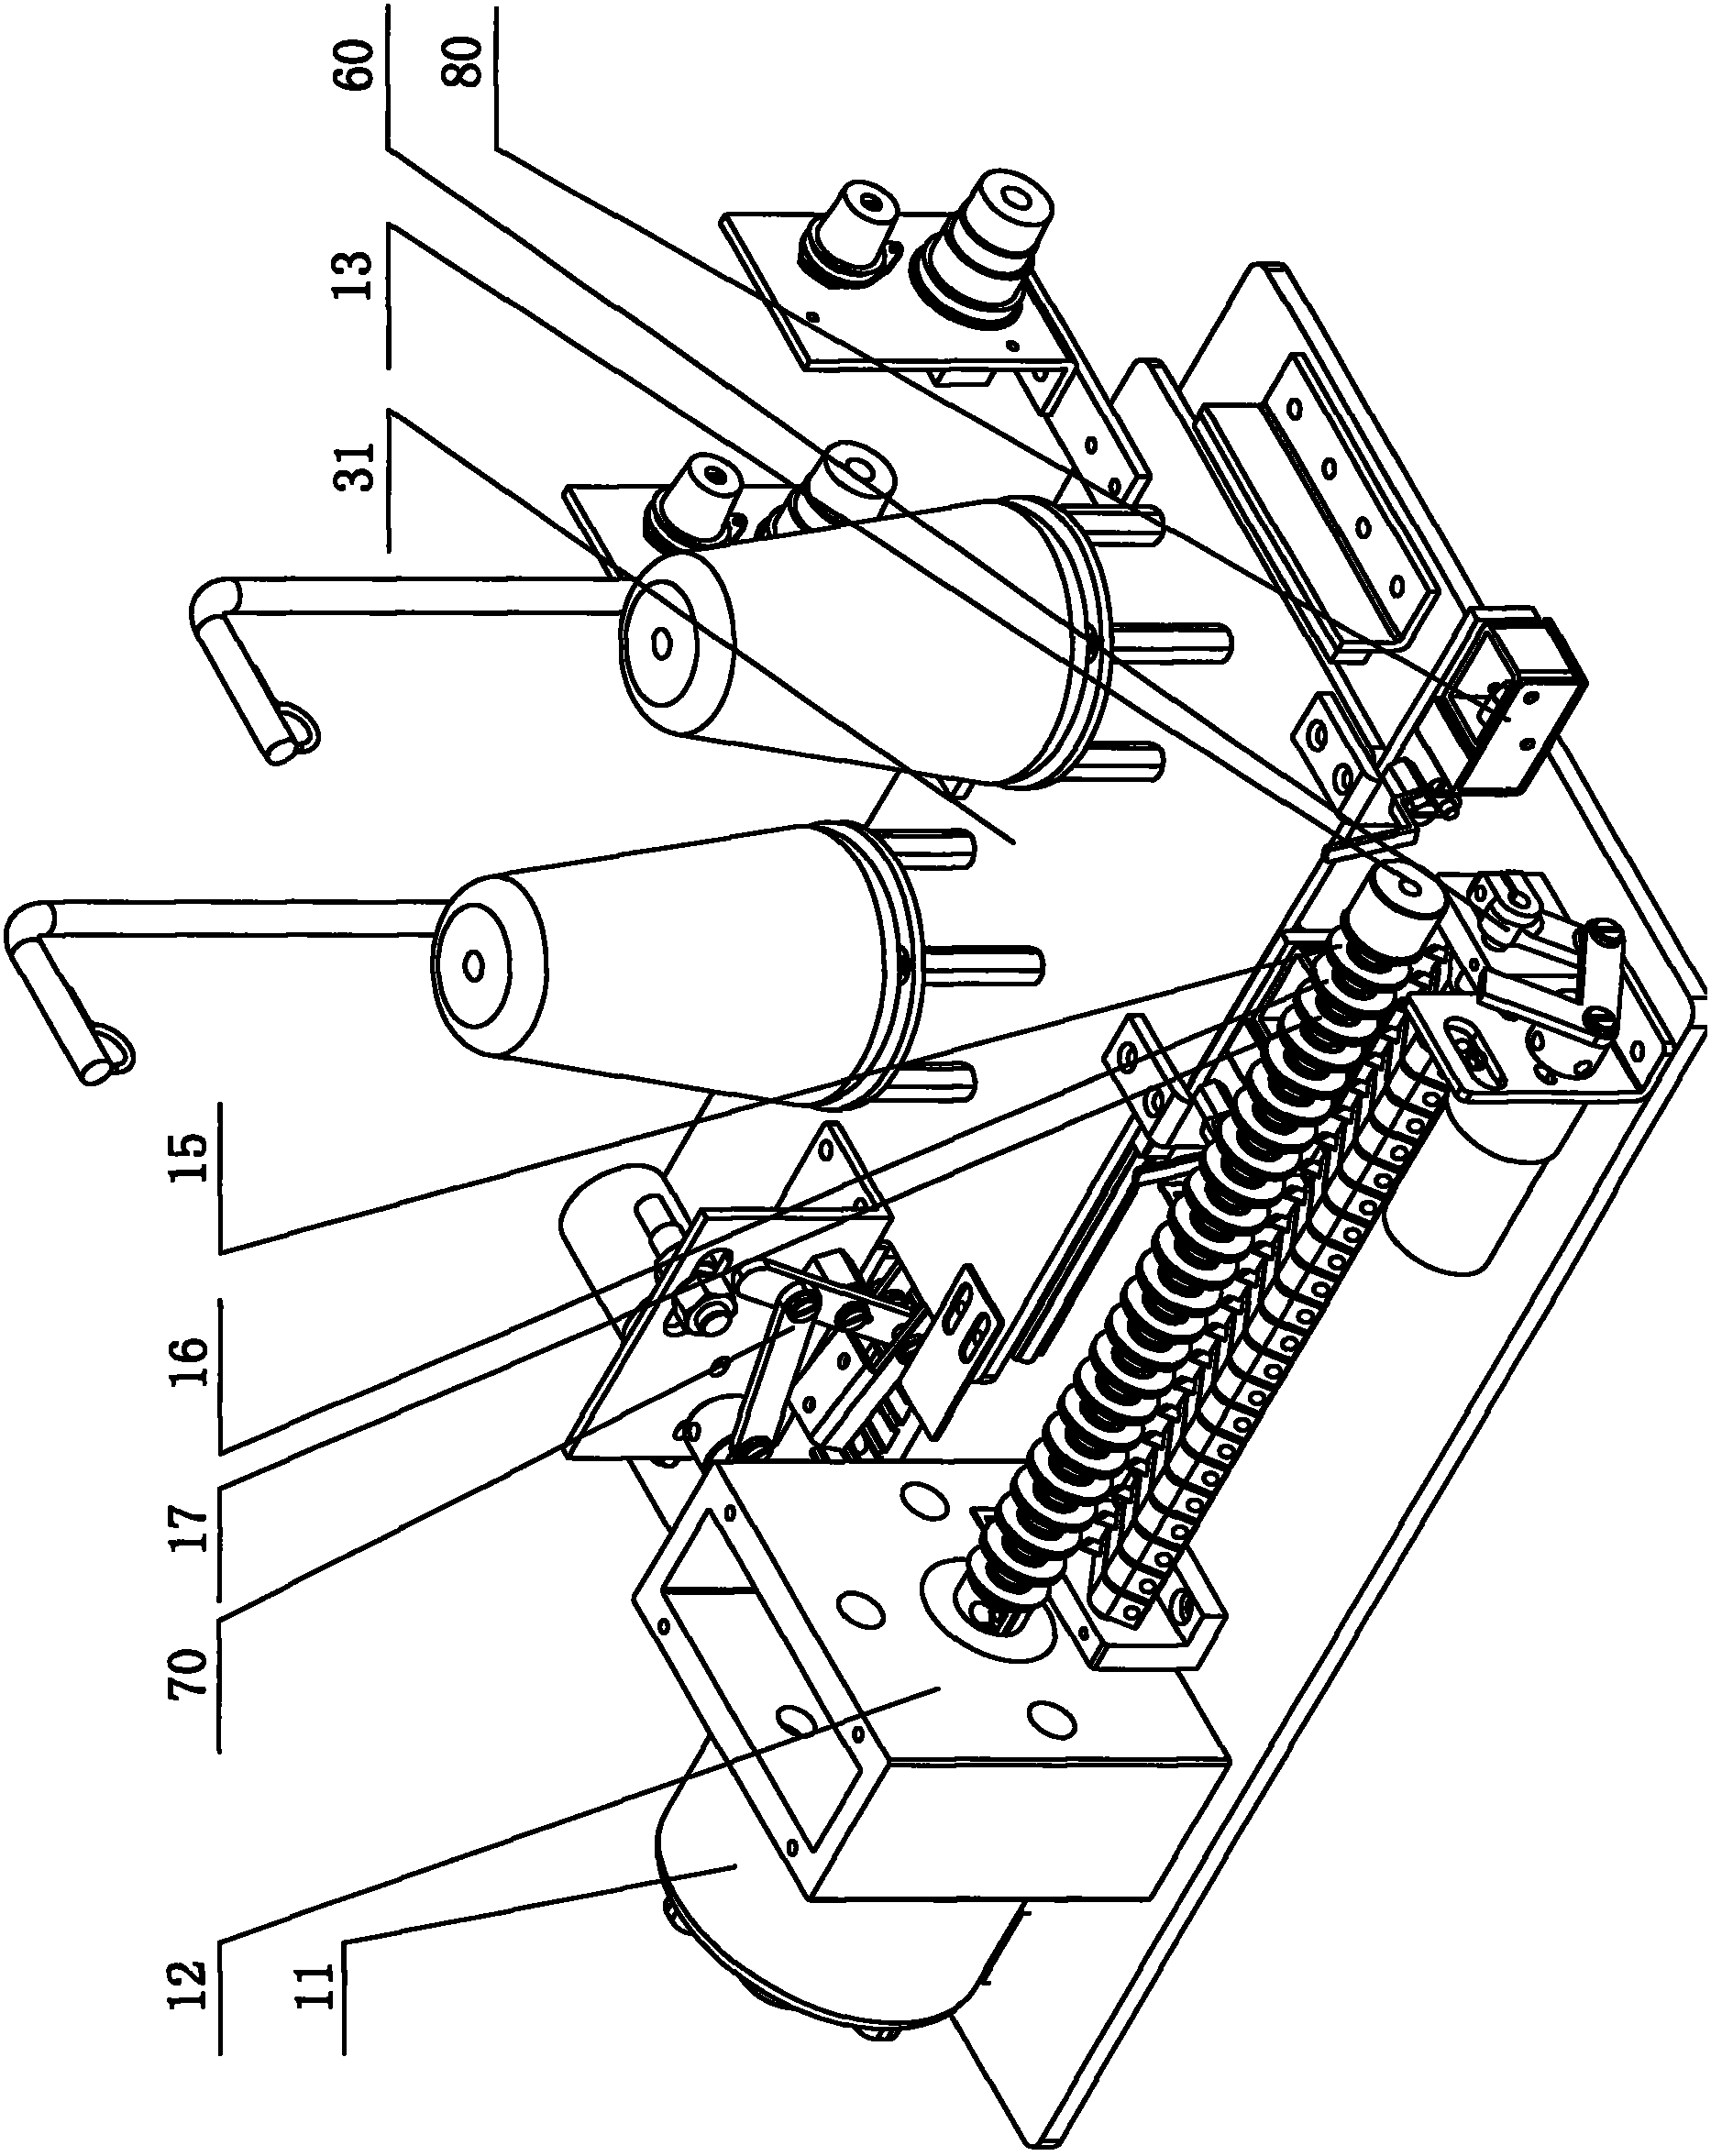 Full-automatic efficient computer winding machine